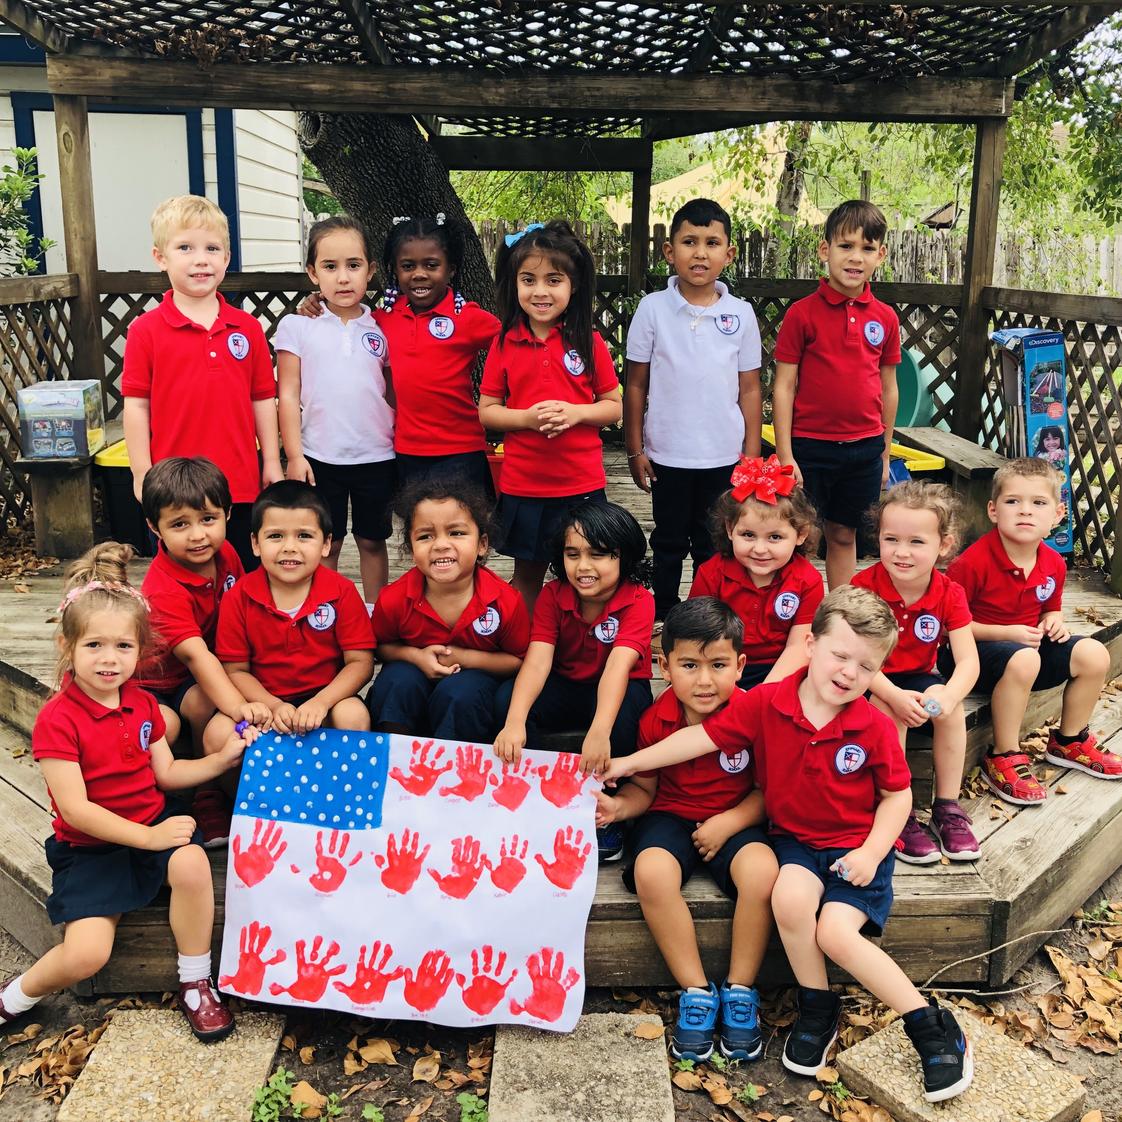 Epiphany Episcopal School Photo #1 - Epiphany students showing off their hand-made U.S. Flag in observance of Veteran's Day.